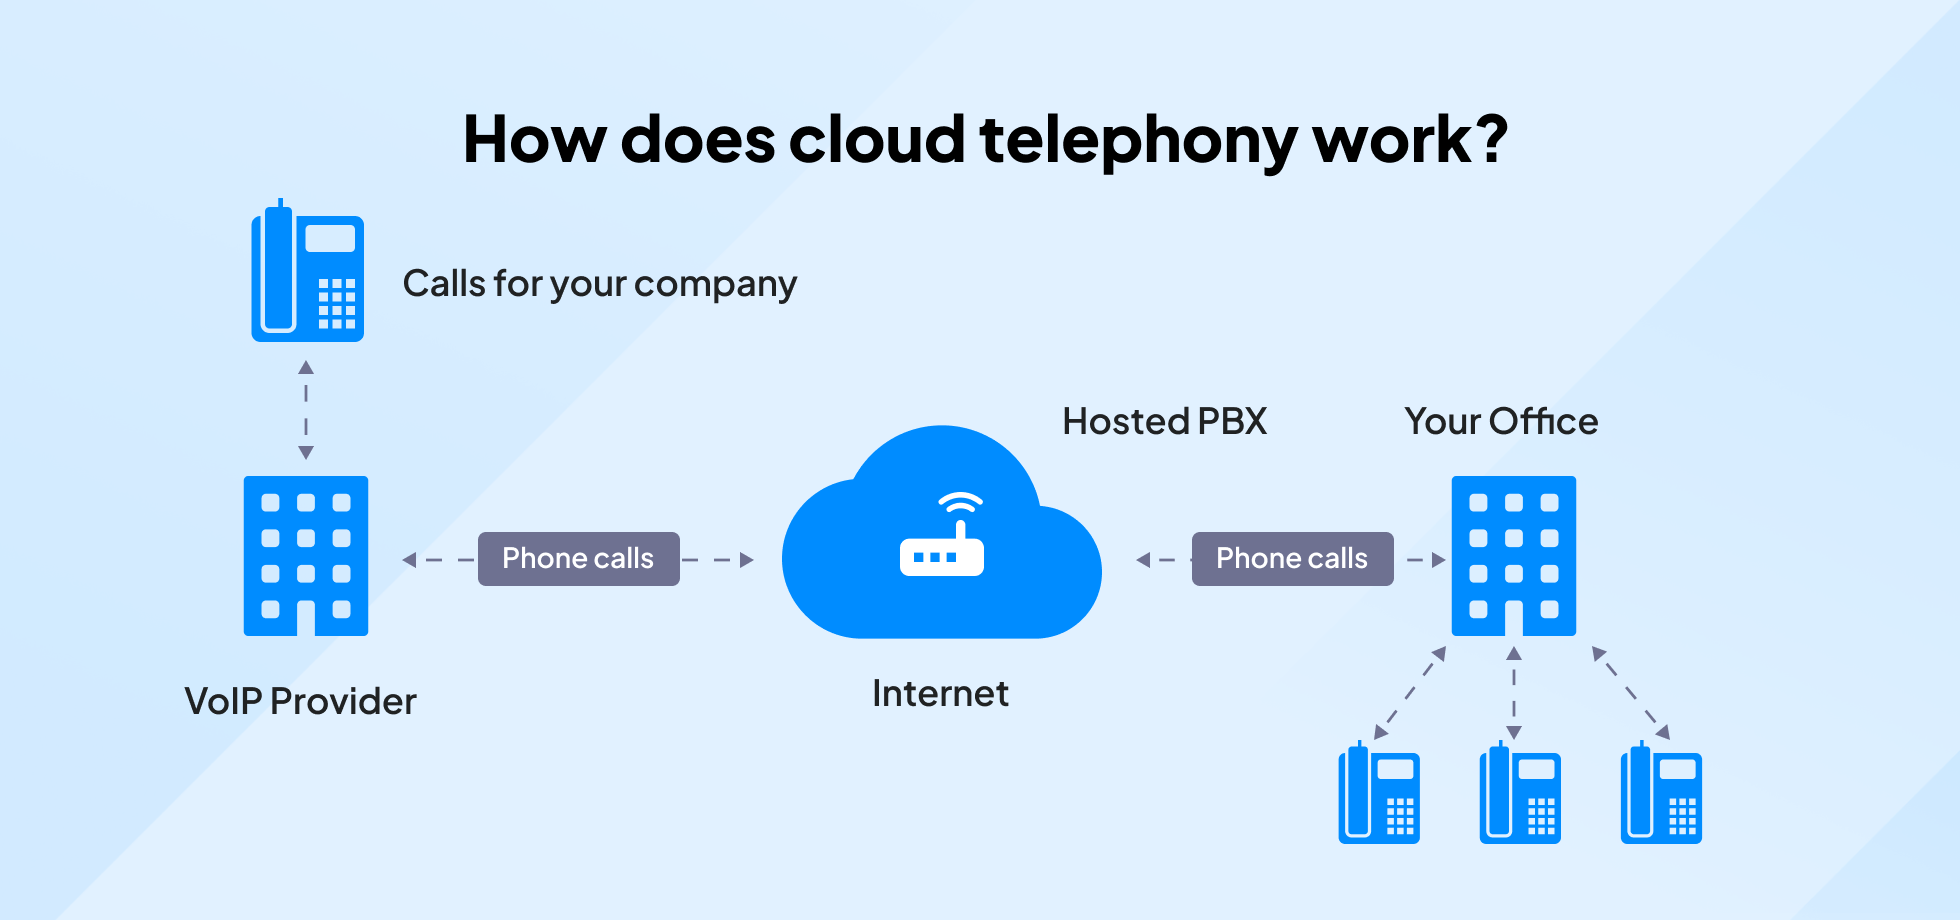 How does cloud telephony work